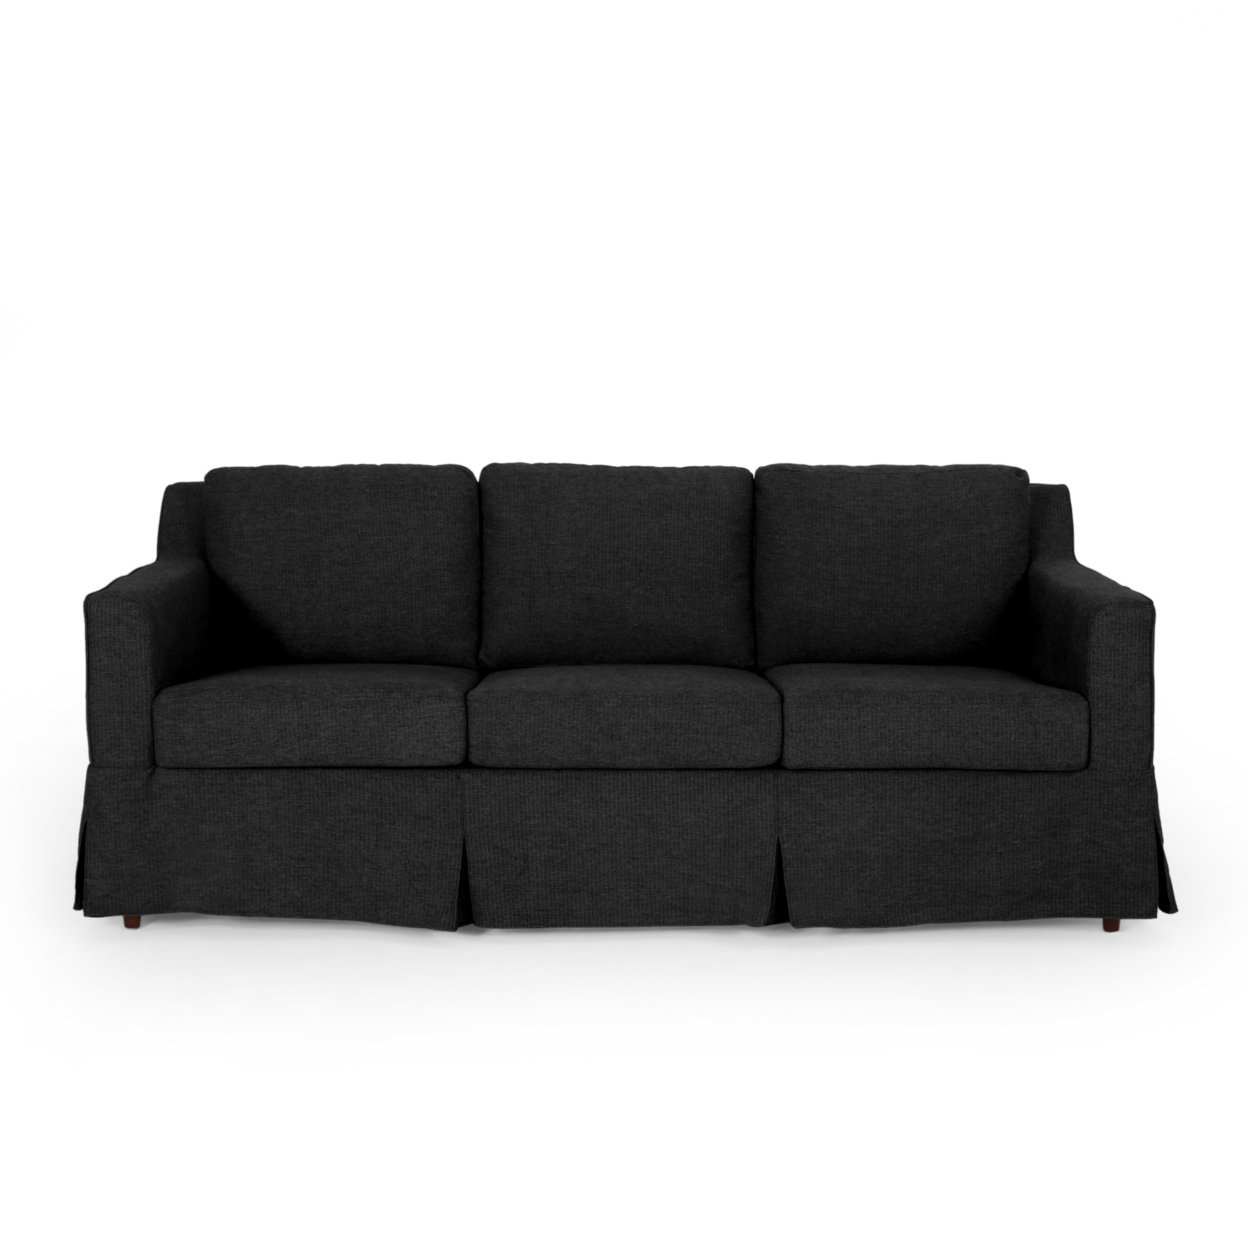 Bainville Contemporary Fabric 3 Seater Sofa With Skirt - Charcoal Stripe